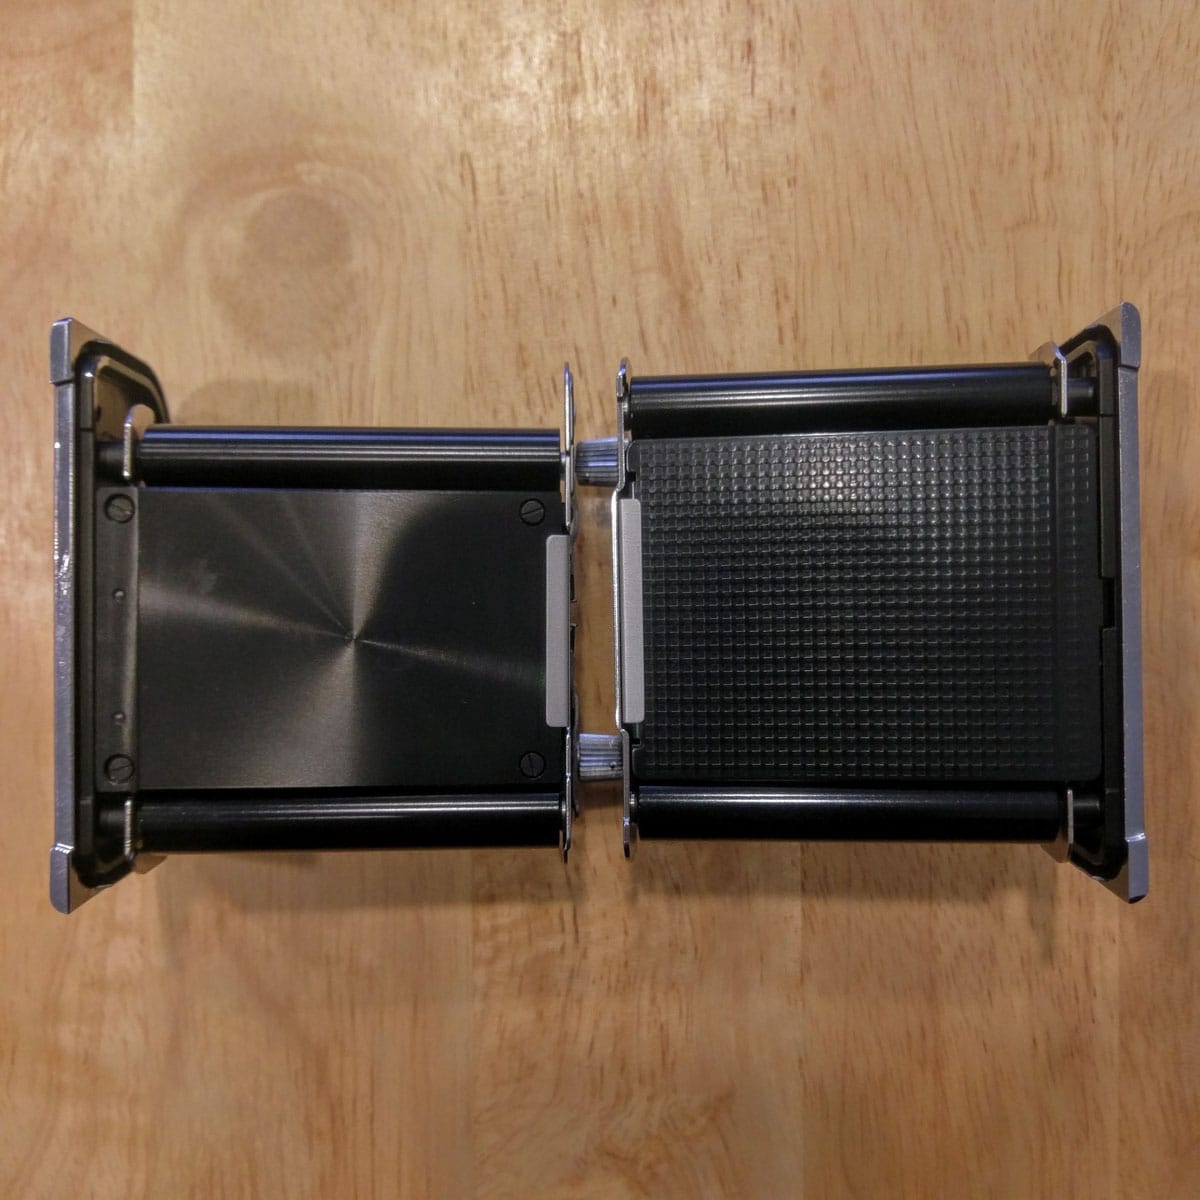 Hasselblad film magazine inserts: Left: 6x4.5 (A16). Right: 6x6 (A12).